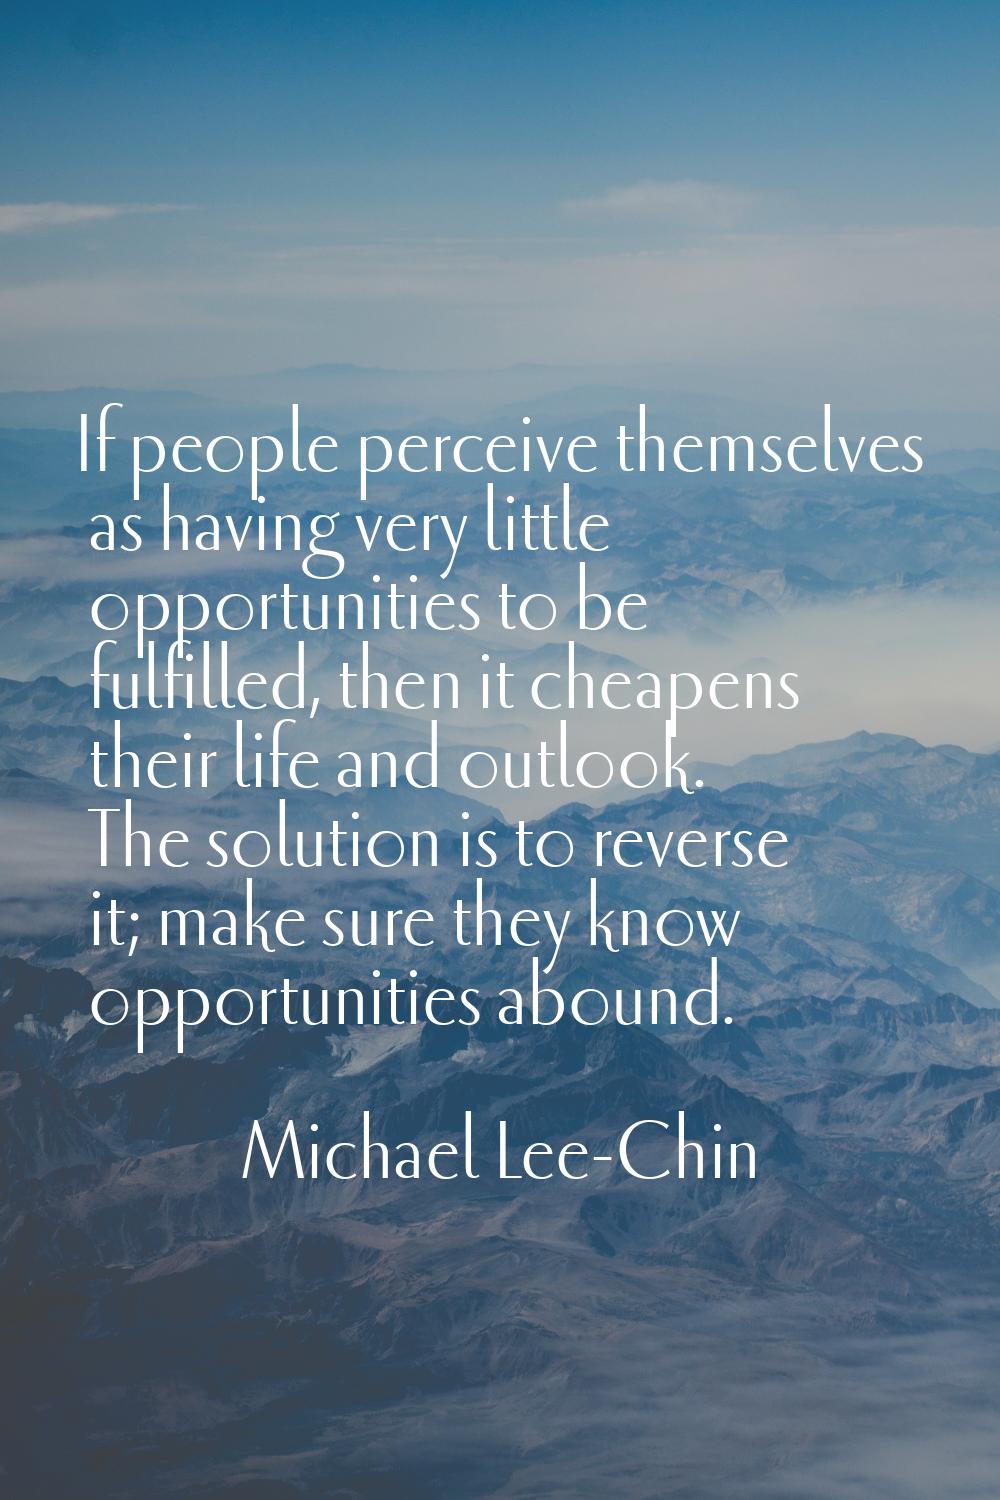 If people perceive themselves as having very little opportunities to be fulfilled, then it cheapens